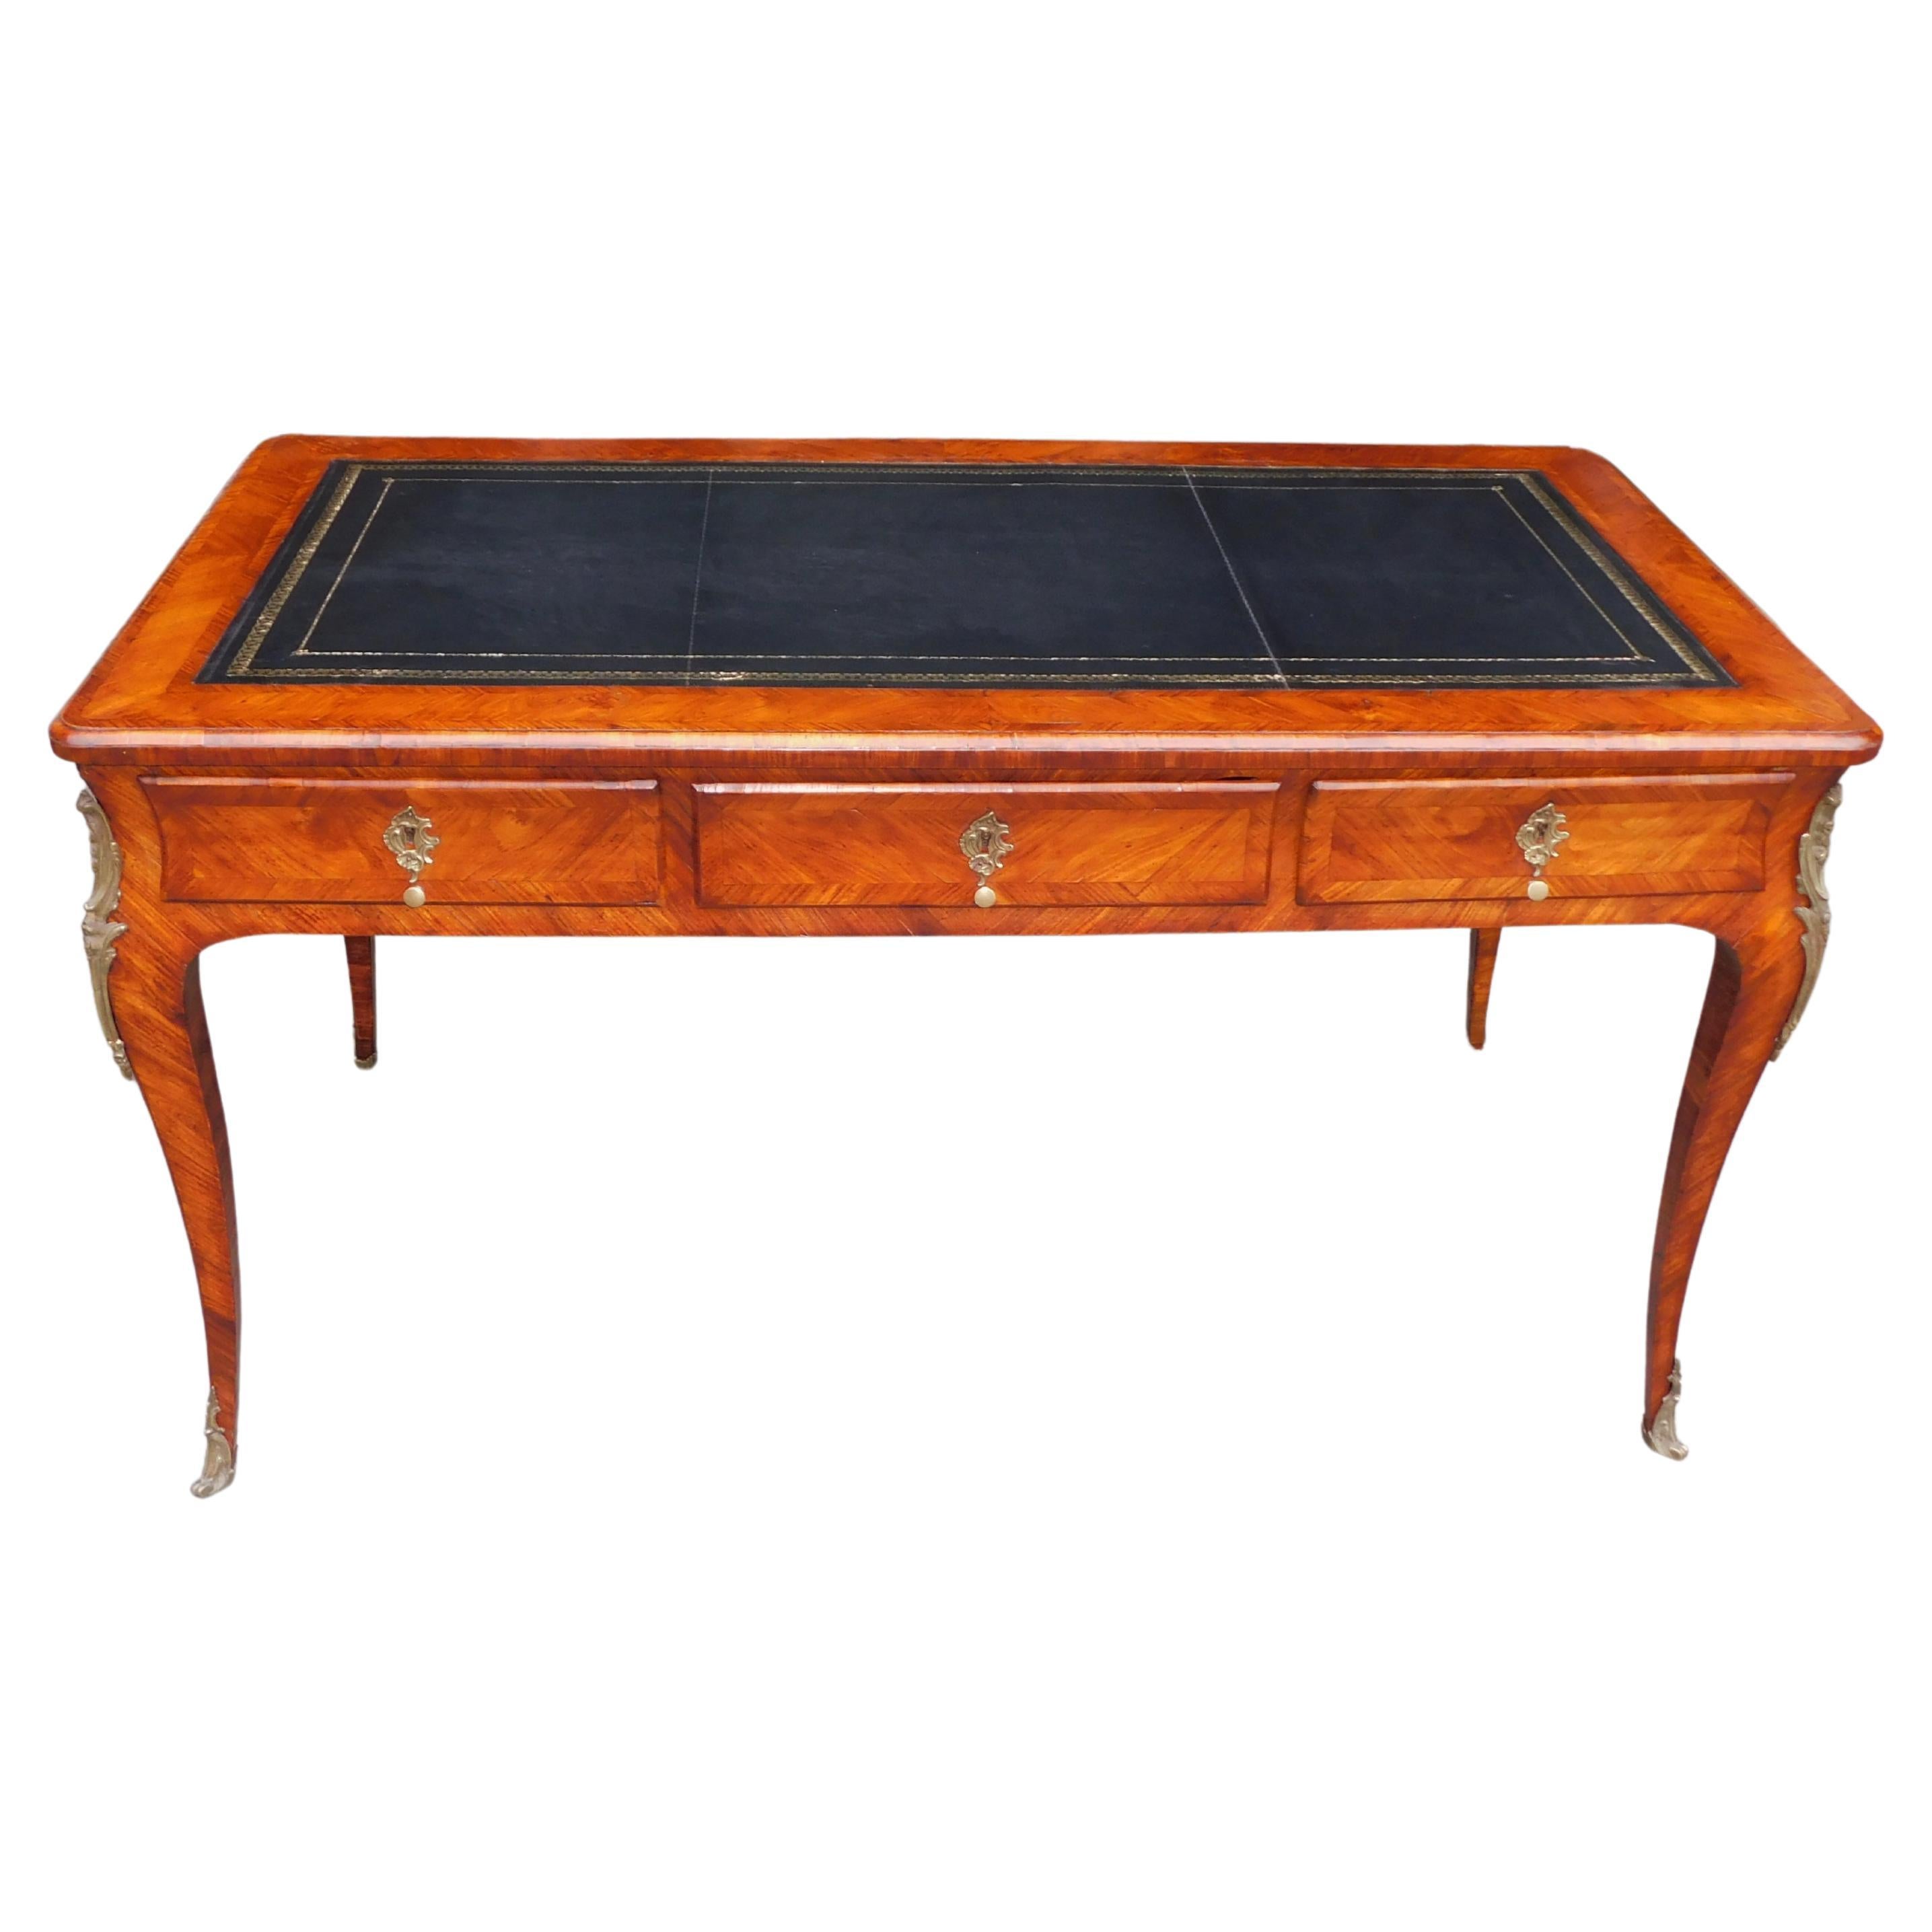 French Bureau Plat Marquetry Leather Top Desk with Orig. Ormolu Mounts, C. 1770 For Sale